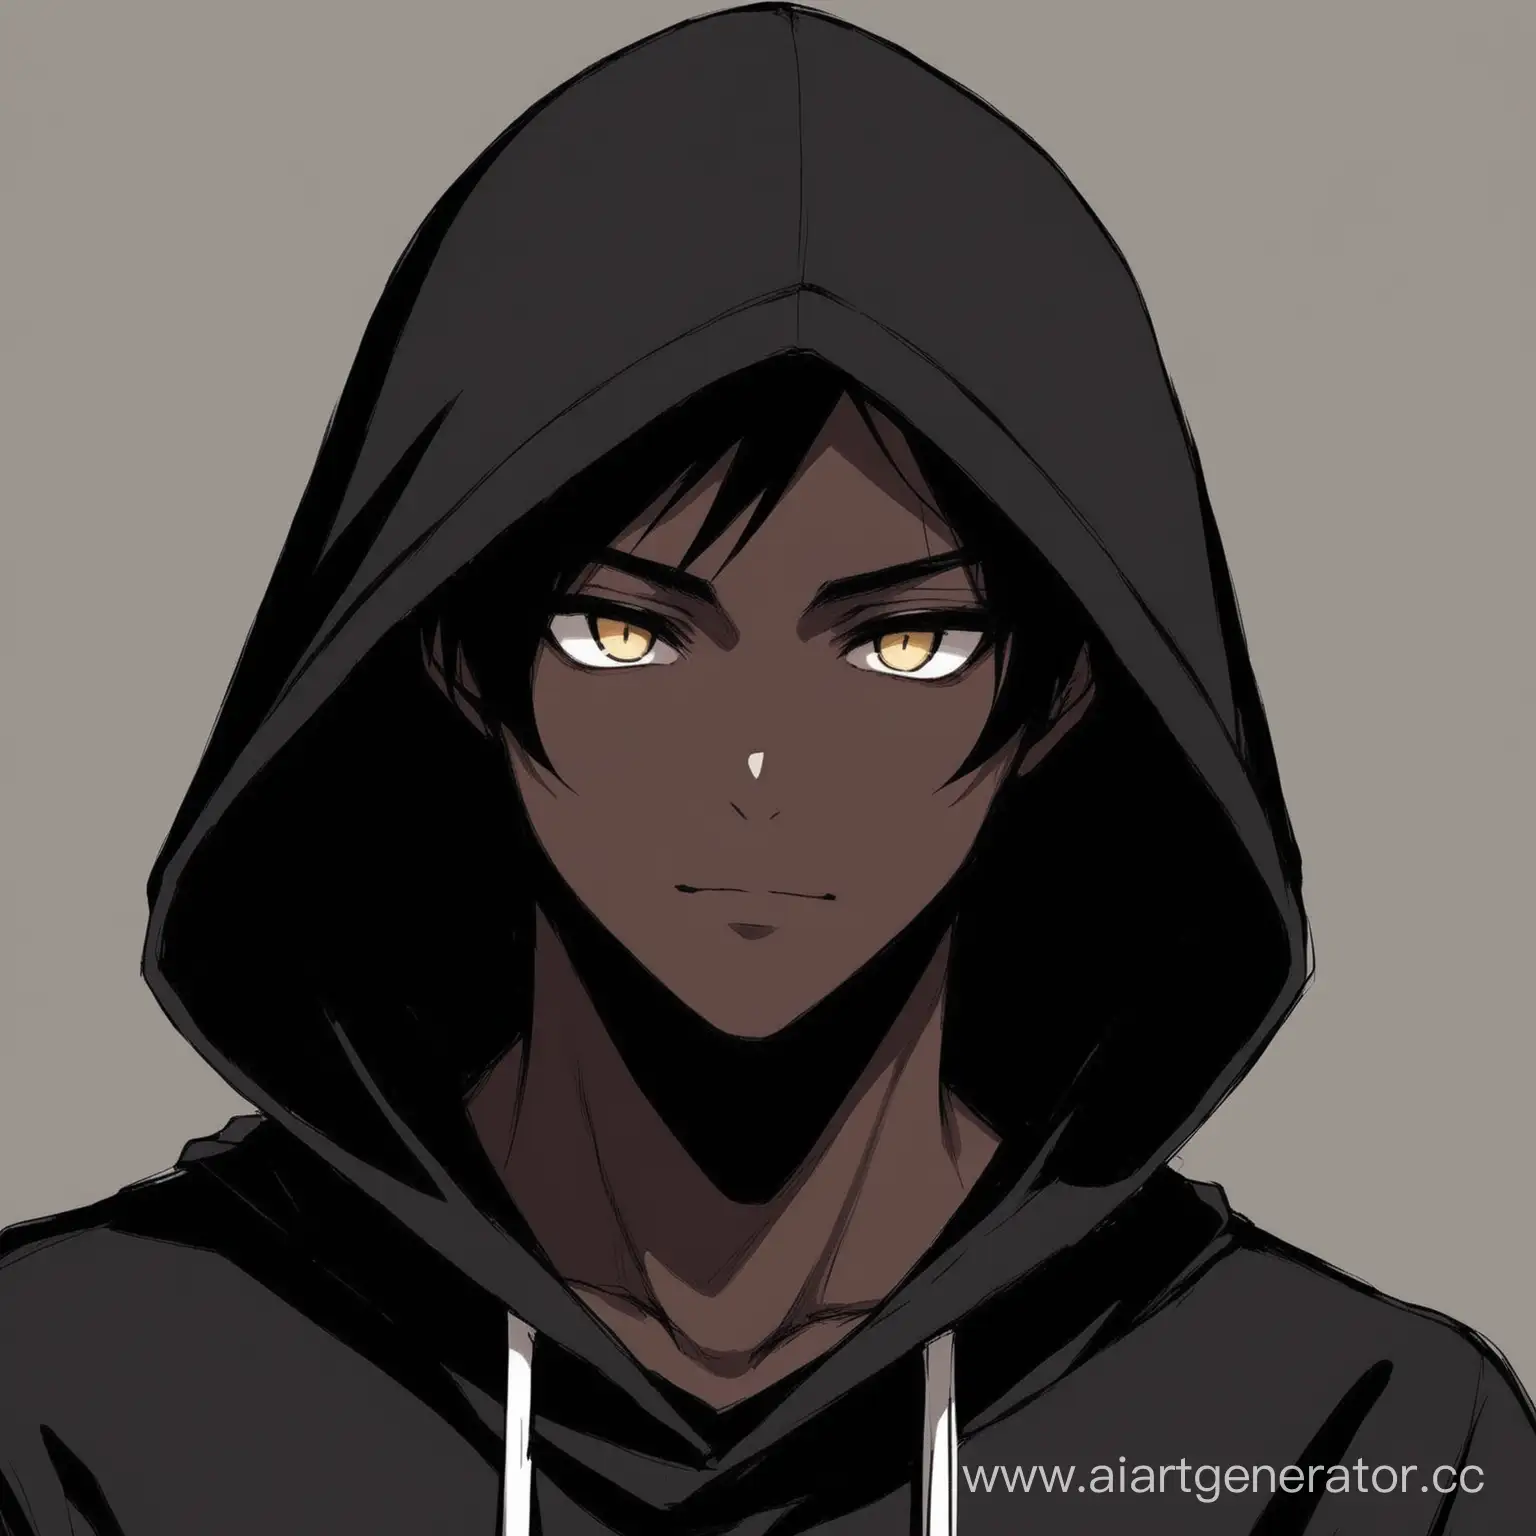 Draw me a dark anime avatar with a guy in a hood